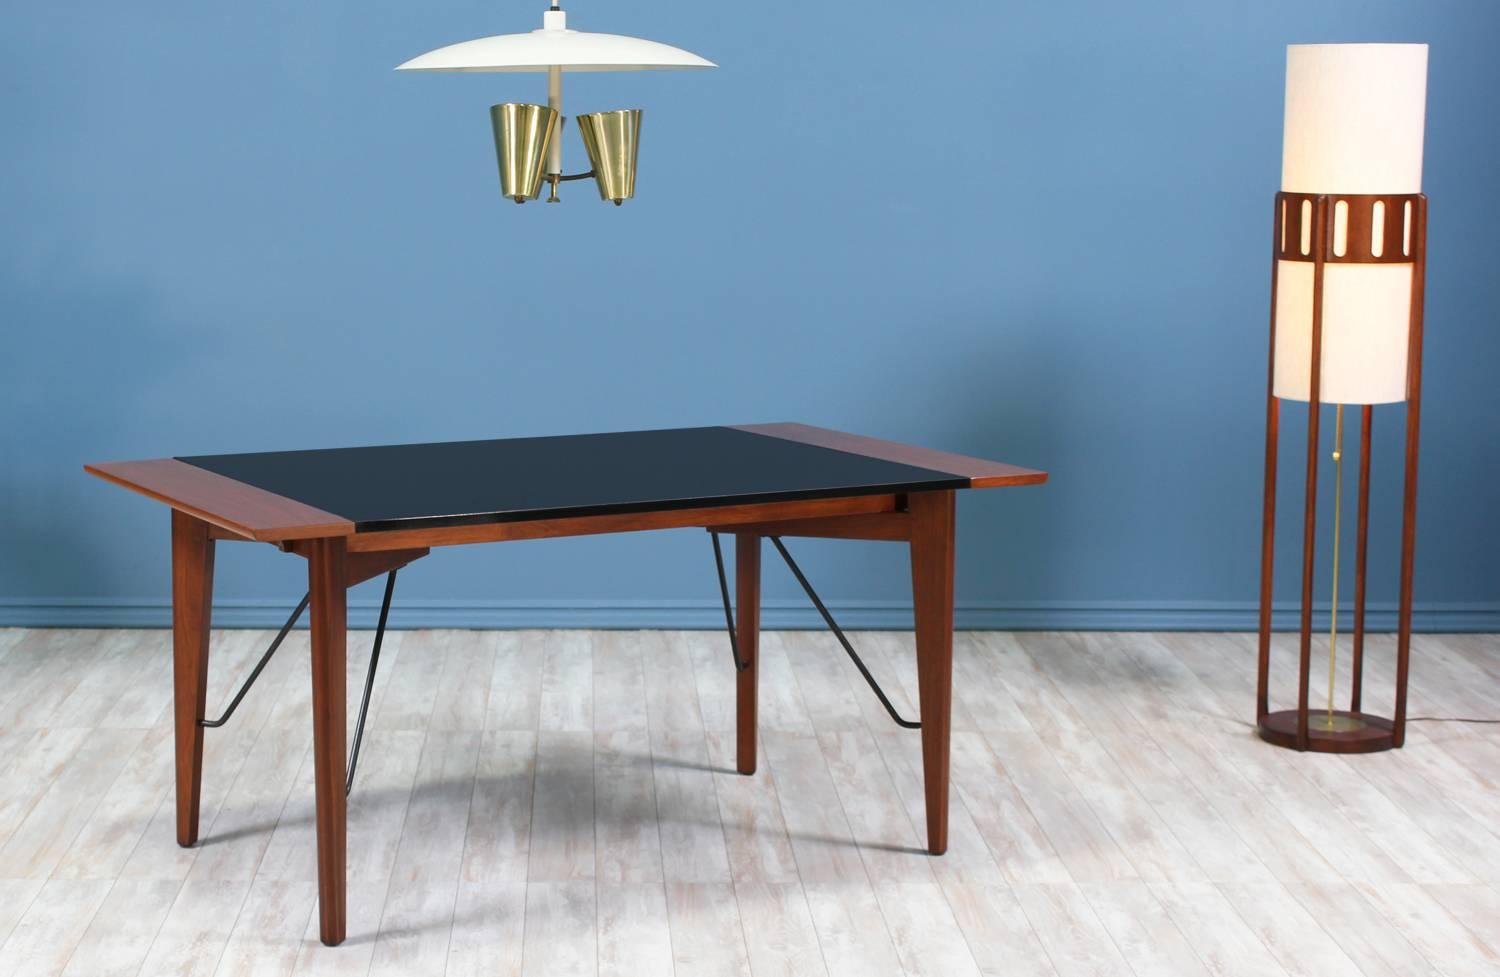 Dining table designed by Greta M. Grossman for Glenn of California in the United States circa 1950’s. This extraordinary dining has been newly refinished by our team of experts. The table features a solid walnut wood frame with a black laminate top